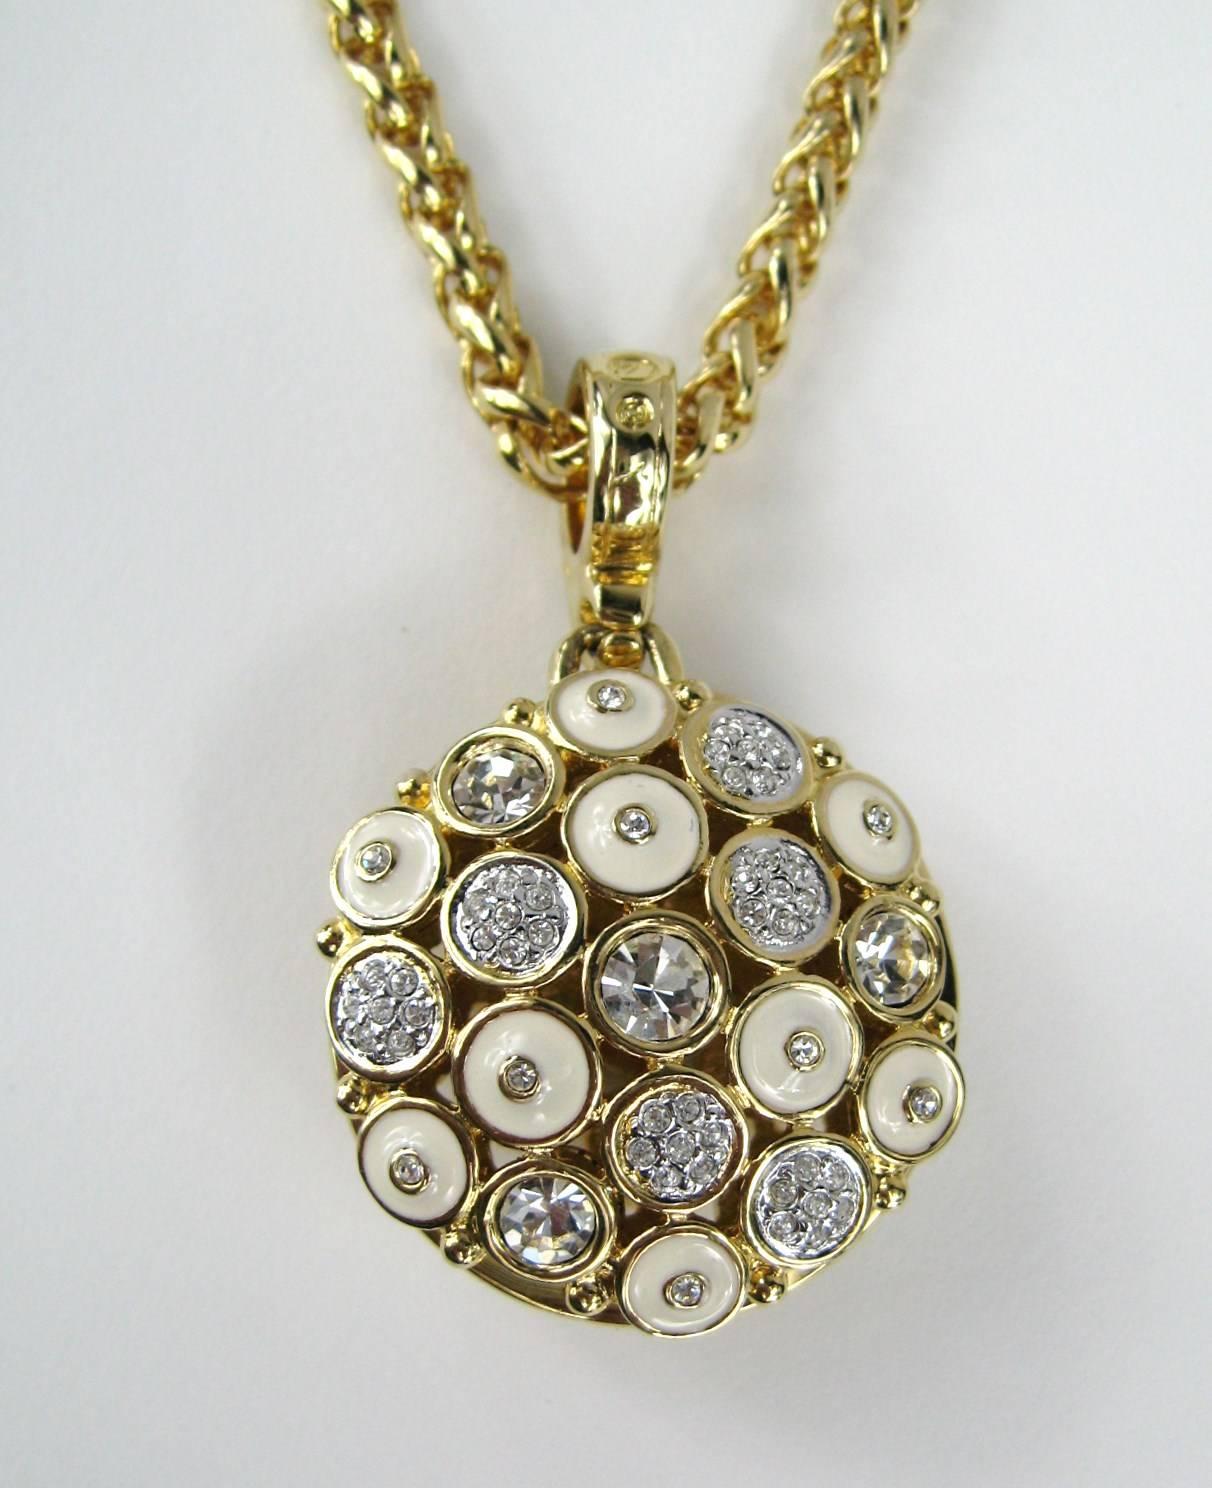 Swarovski Crystal & Enamel Disc Pendant w. Chain. This has Large & small bezel set Crystals alternating with enamel circles, pictures don't show how amazing this necklace is! Hallmarked on the bale & clasp of necklace measures: 1.3 in in diameter x